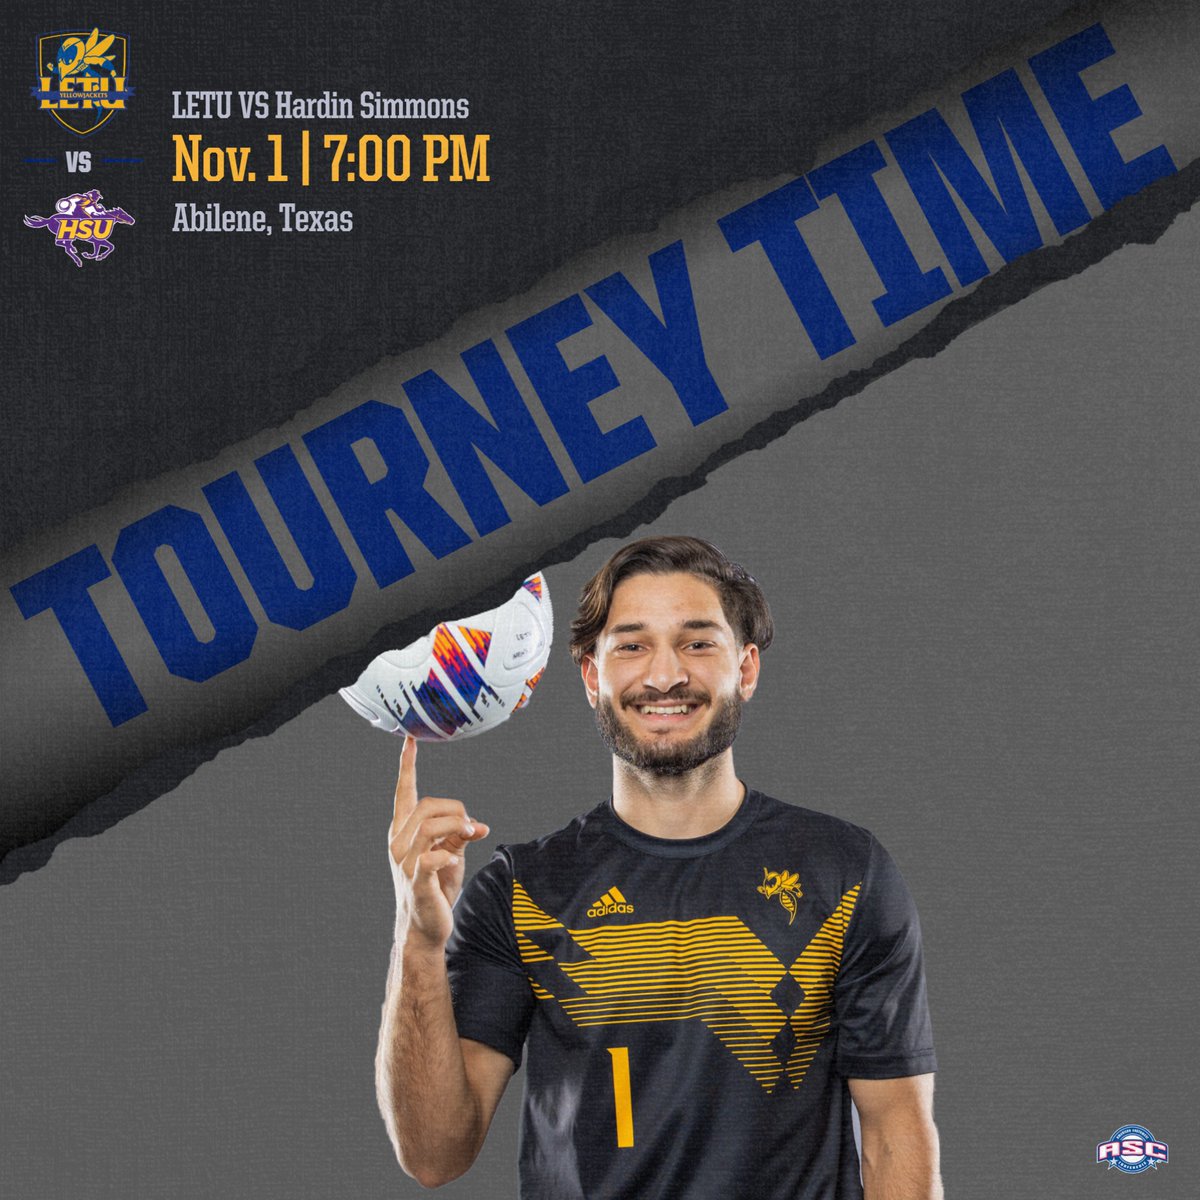 TOURNEY DAY! @LETUMSoccer opens @ASC_sports Tournament play at Hardin-Simmons in the quarterfinals tonight! 🆚 Hardin-Simmons 📍 Abilene, Texas ⏰ 7:00 PM 🎥/📈 letuathletics.com/live Preview: letuathletics.com/news/2022/11/1… #FearTheSting #d3soc